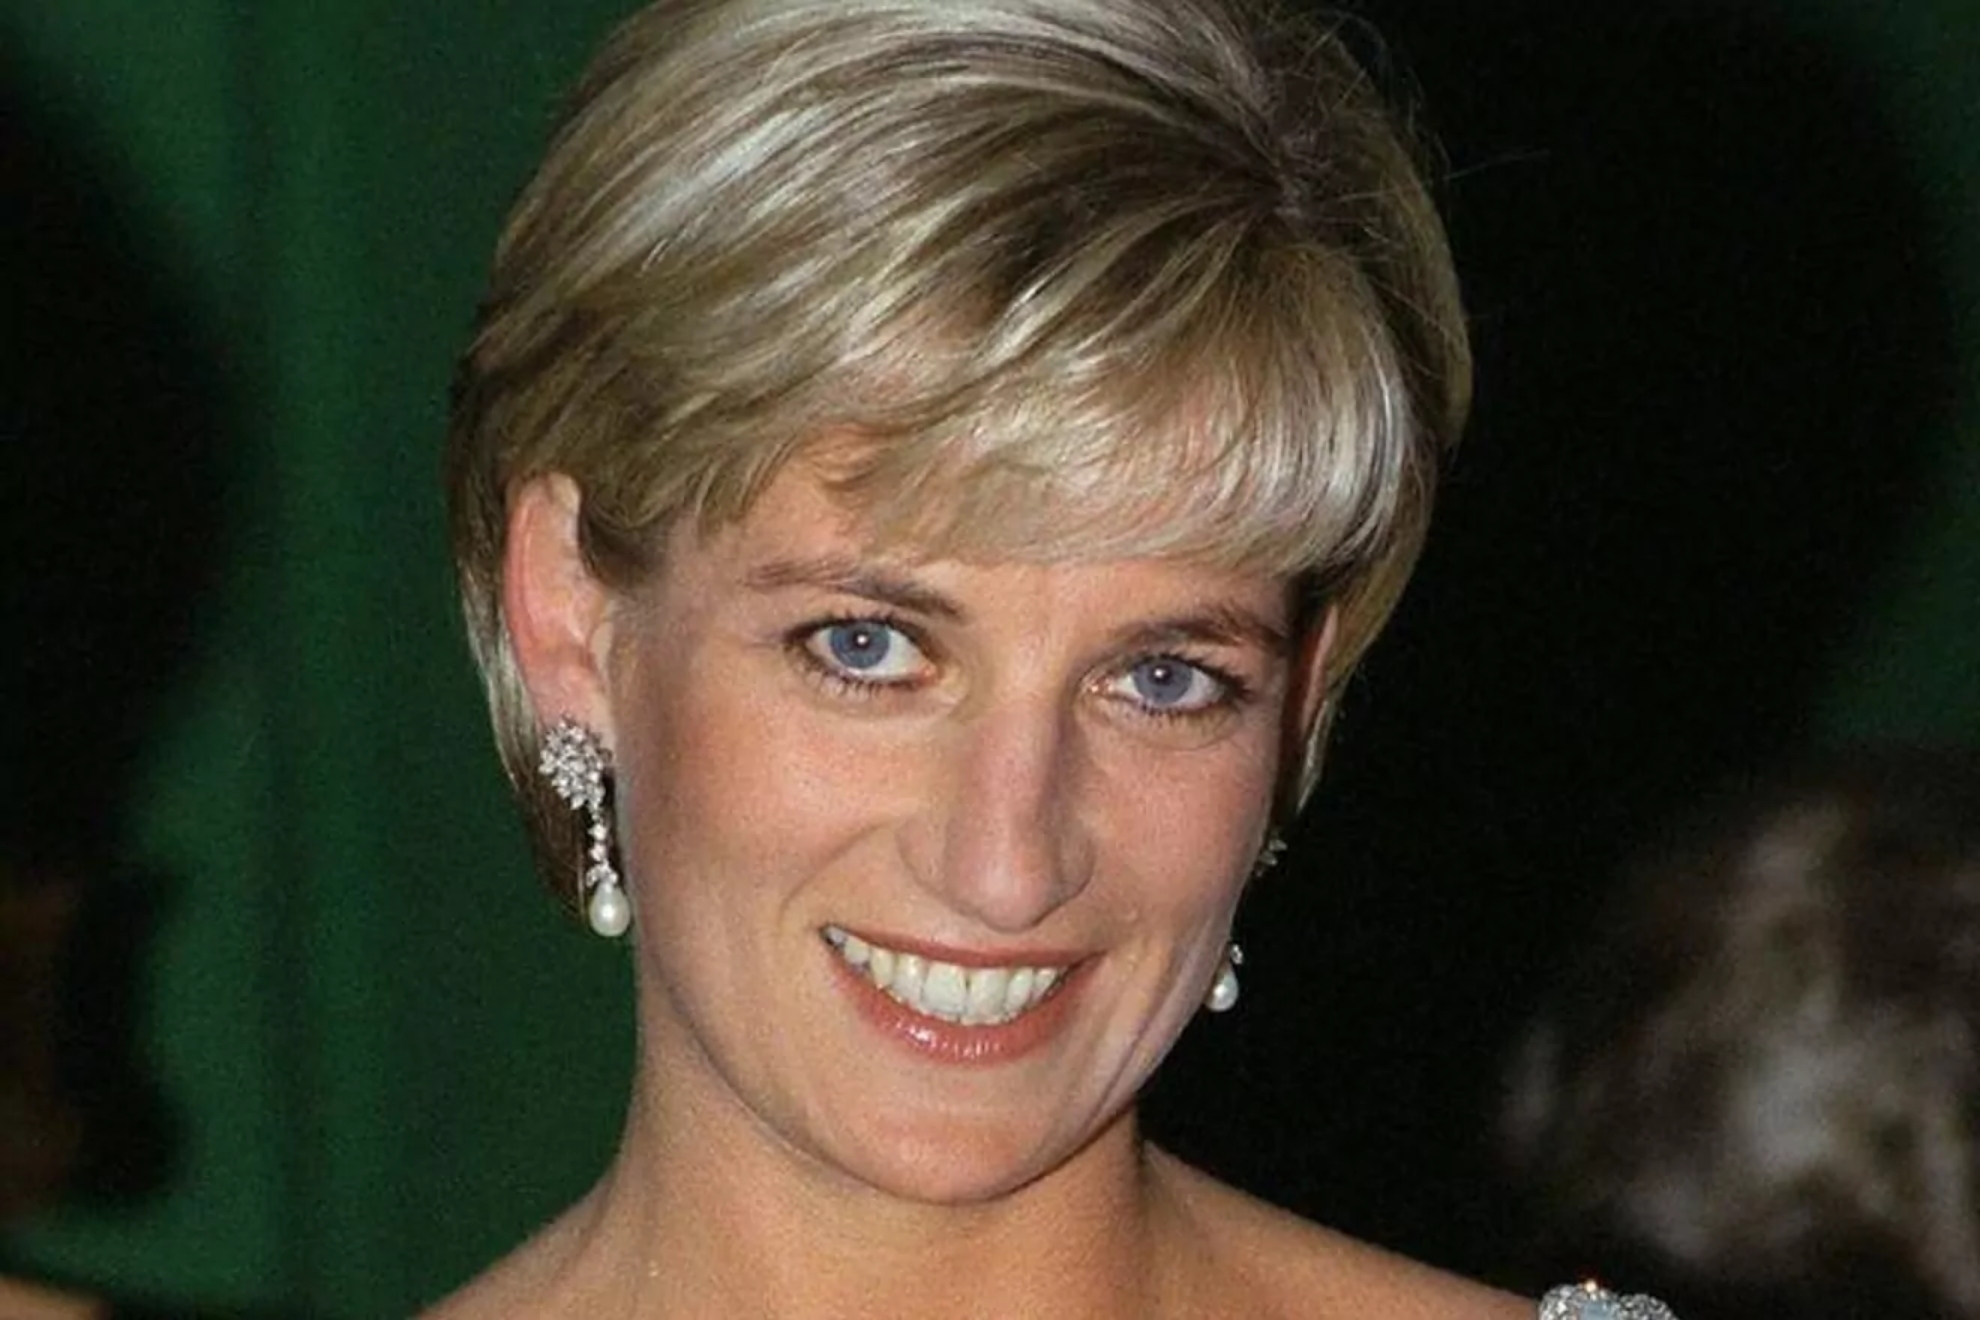 Princess Diana in the 1990s.